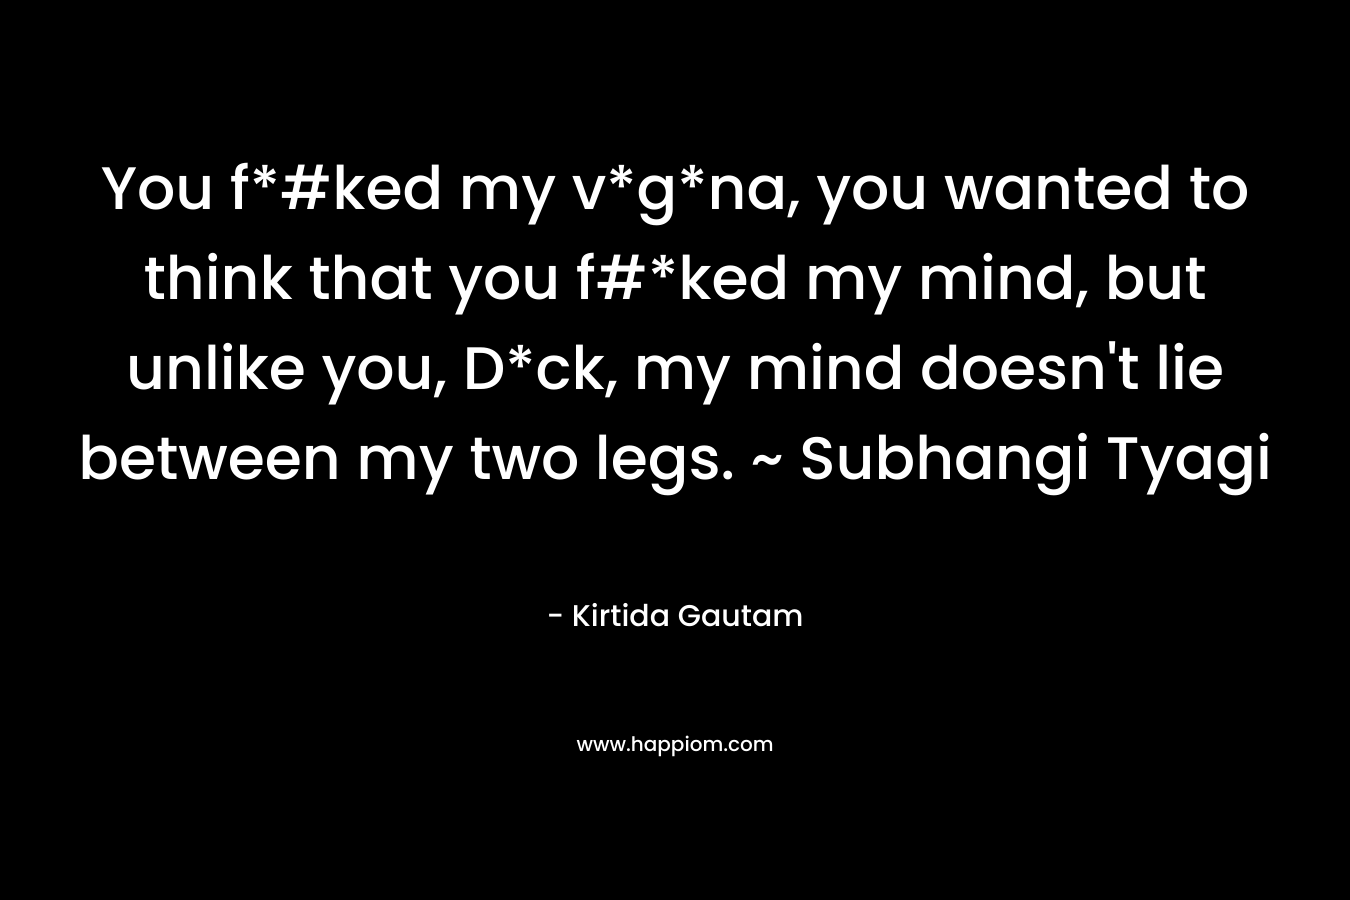 You f*#ked my v*g*na, you wanted to think that you f#*ked my mind, but unlike you, D*ck, my mind doesn't lie between my two legs. ~ Subhangi Tyagi